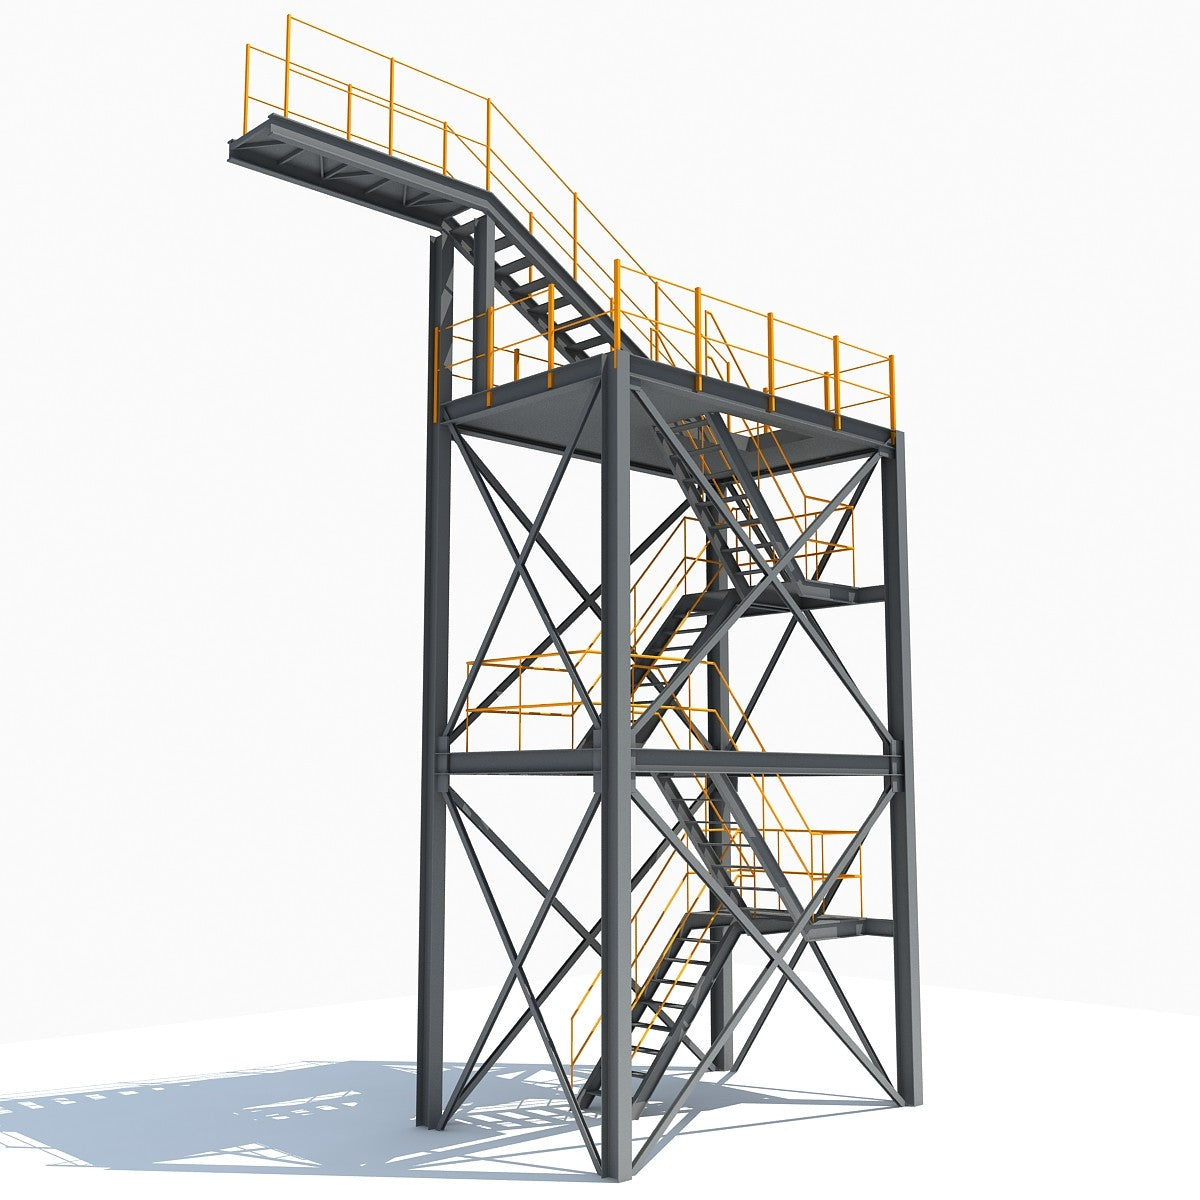 3D Industrial Towers Models